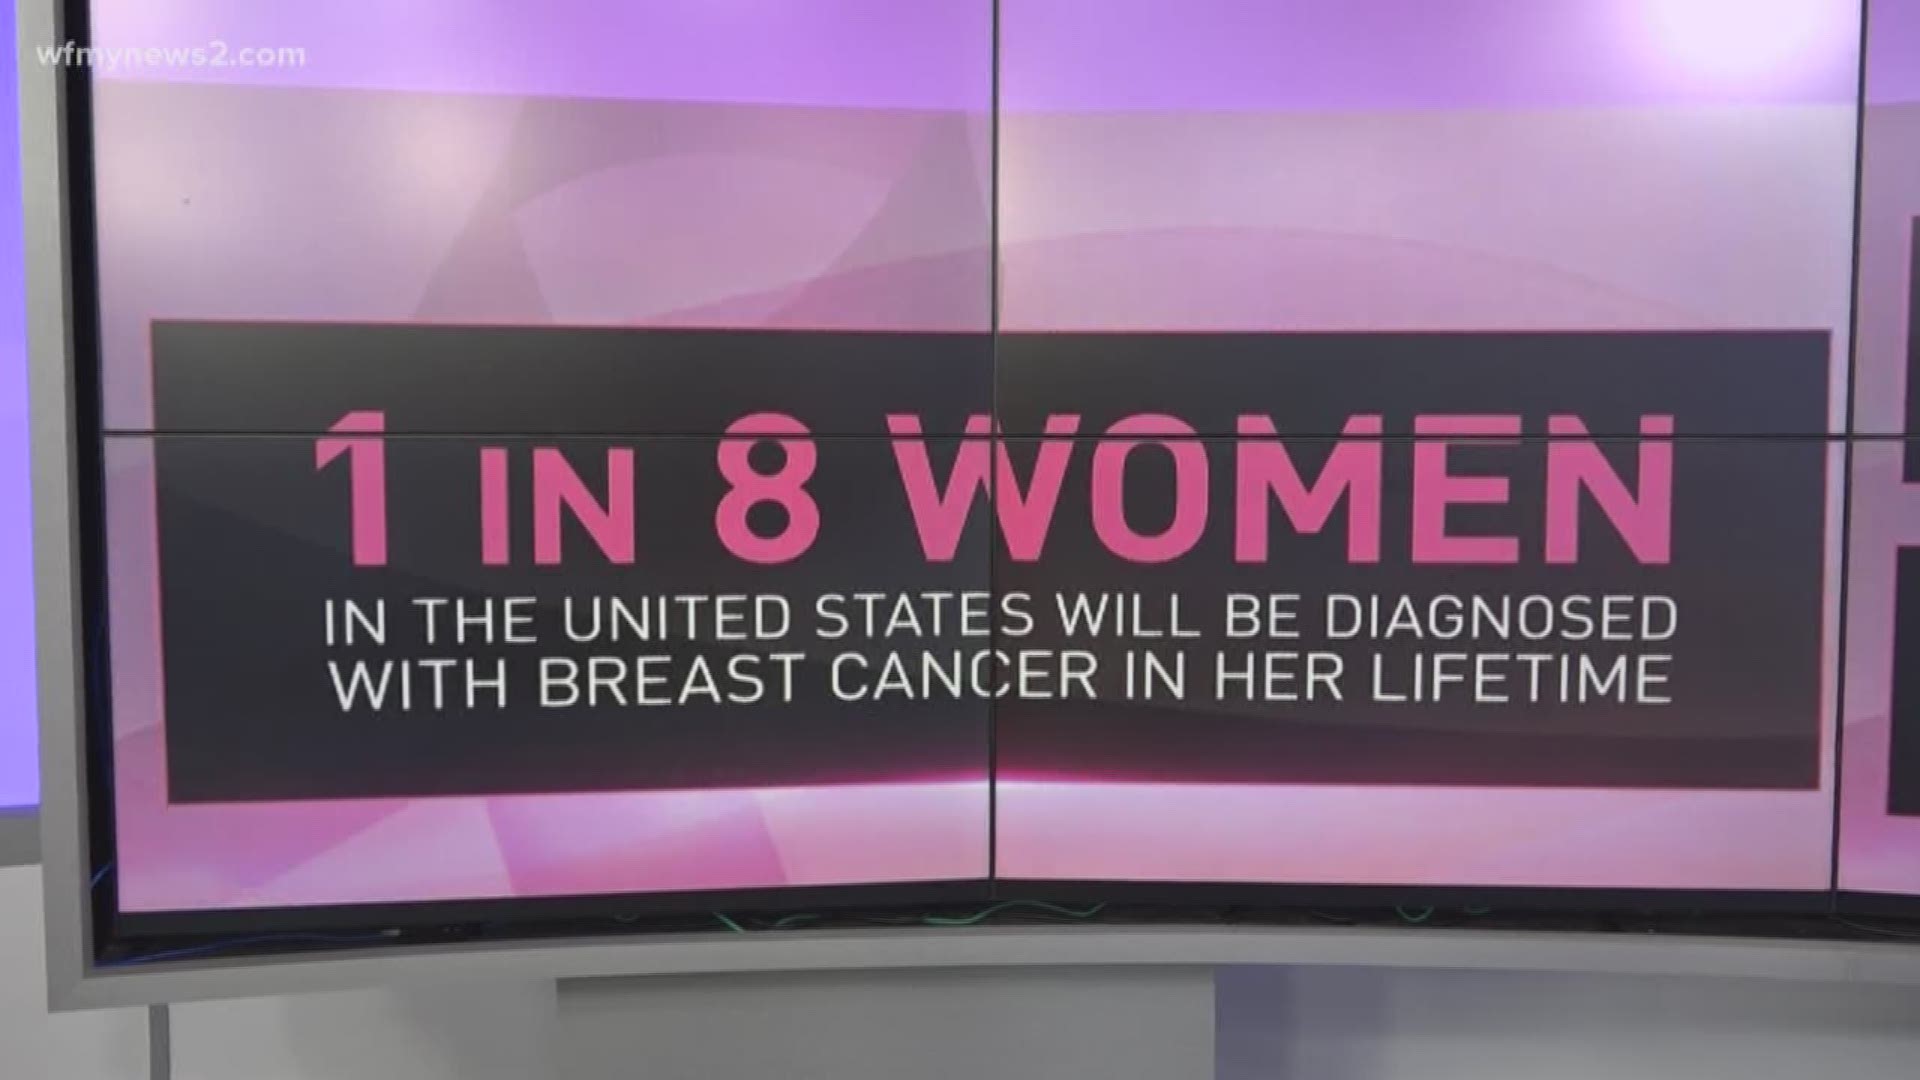 There are several breast cancer warning signs you can't ignore, and a survivor describes how important it is to get mammograms.